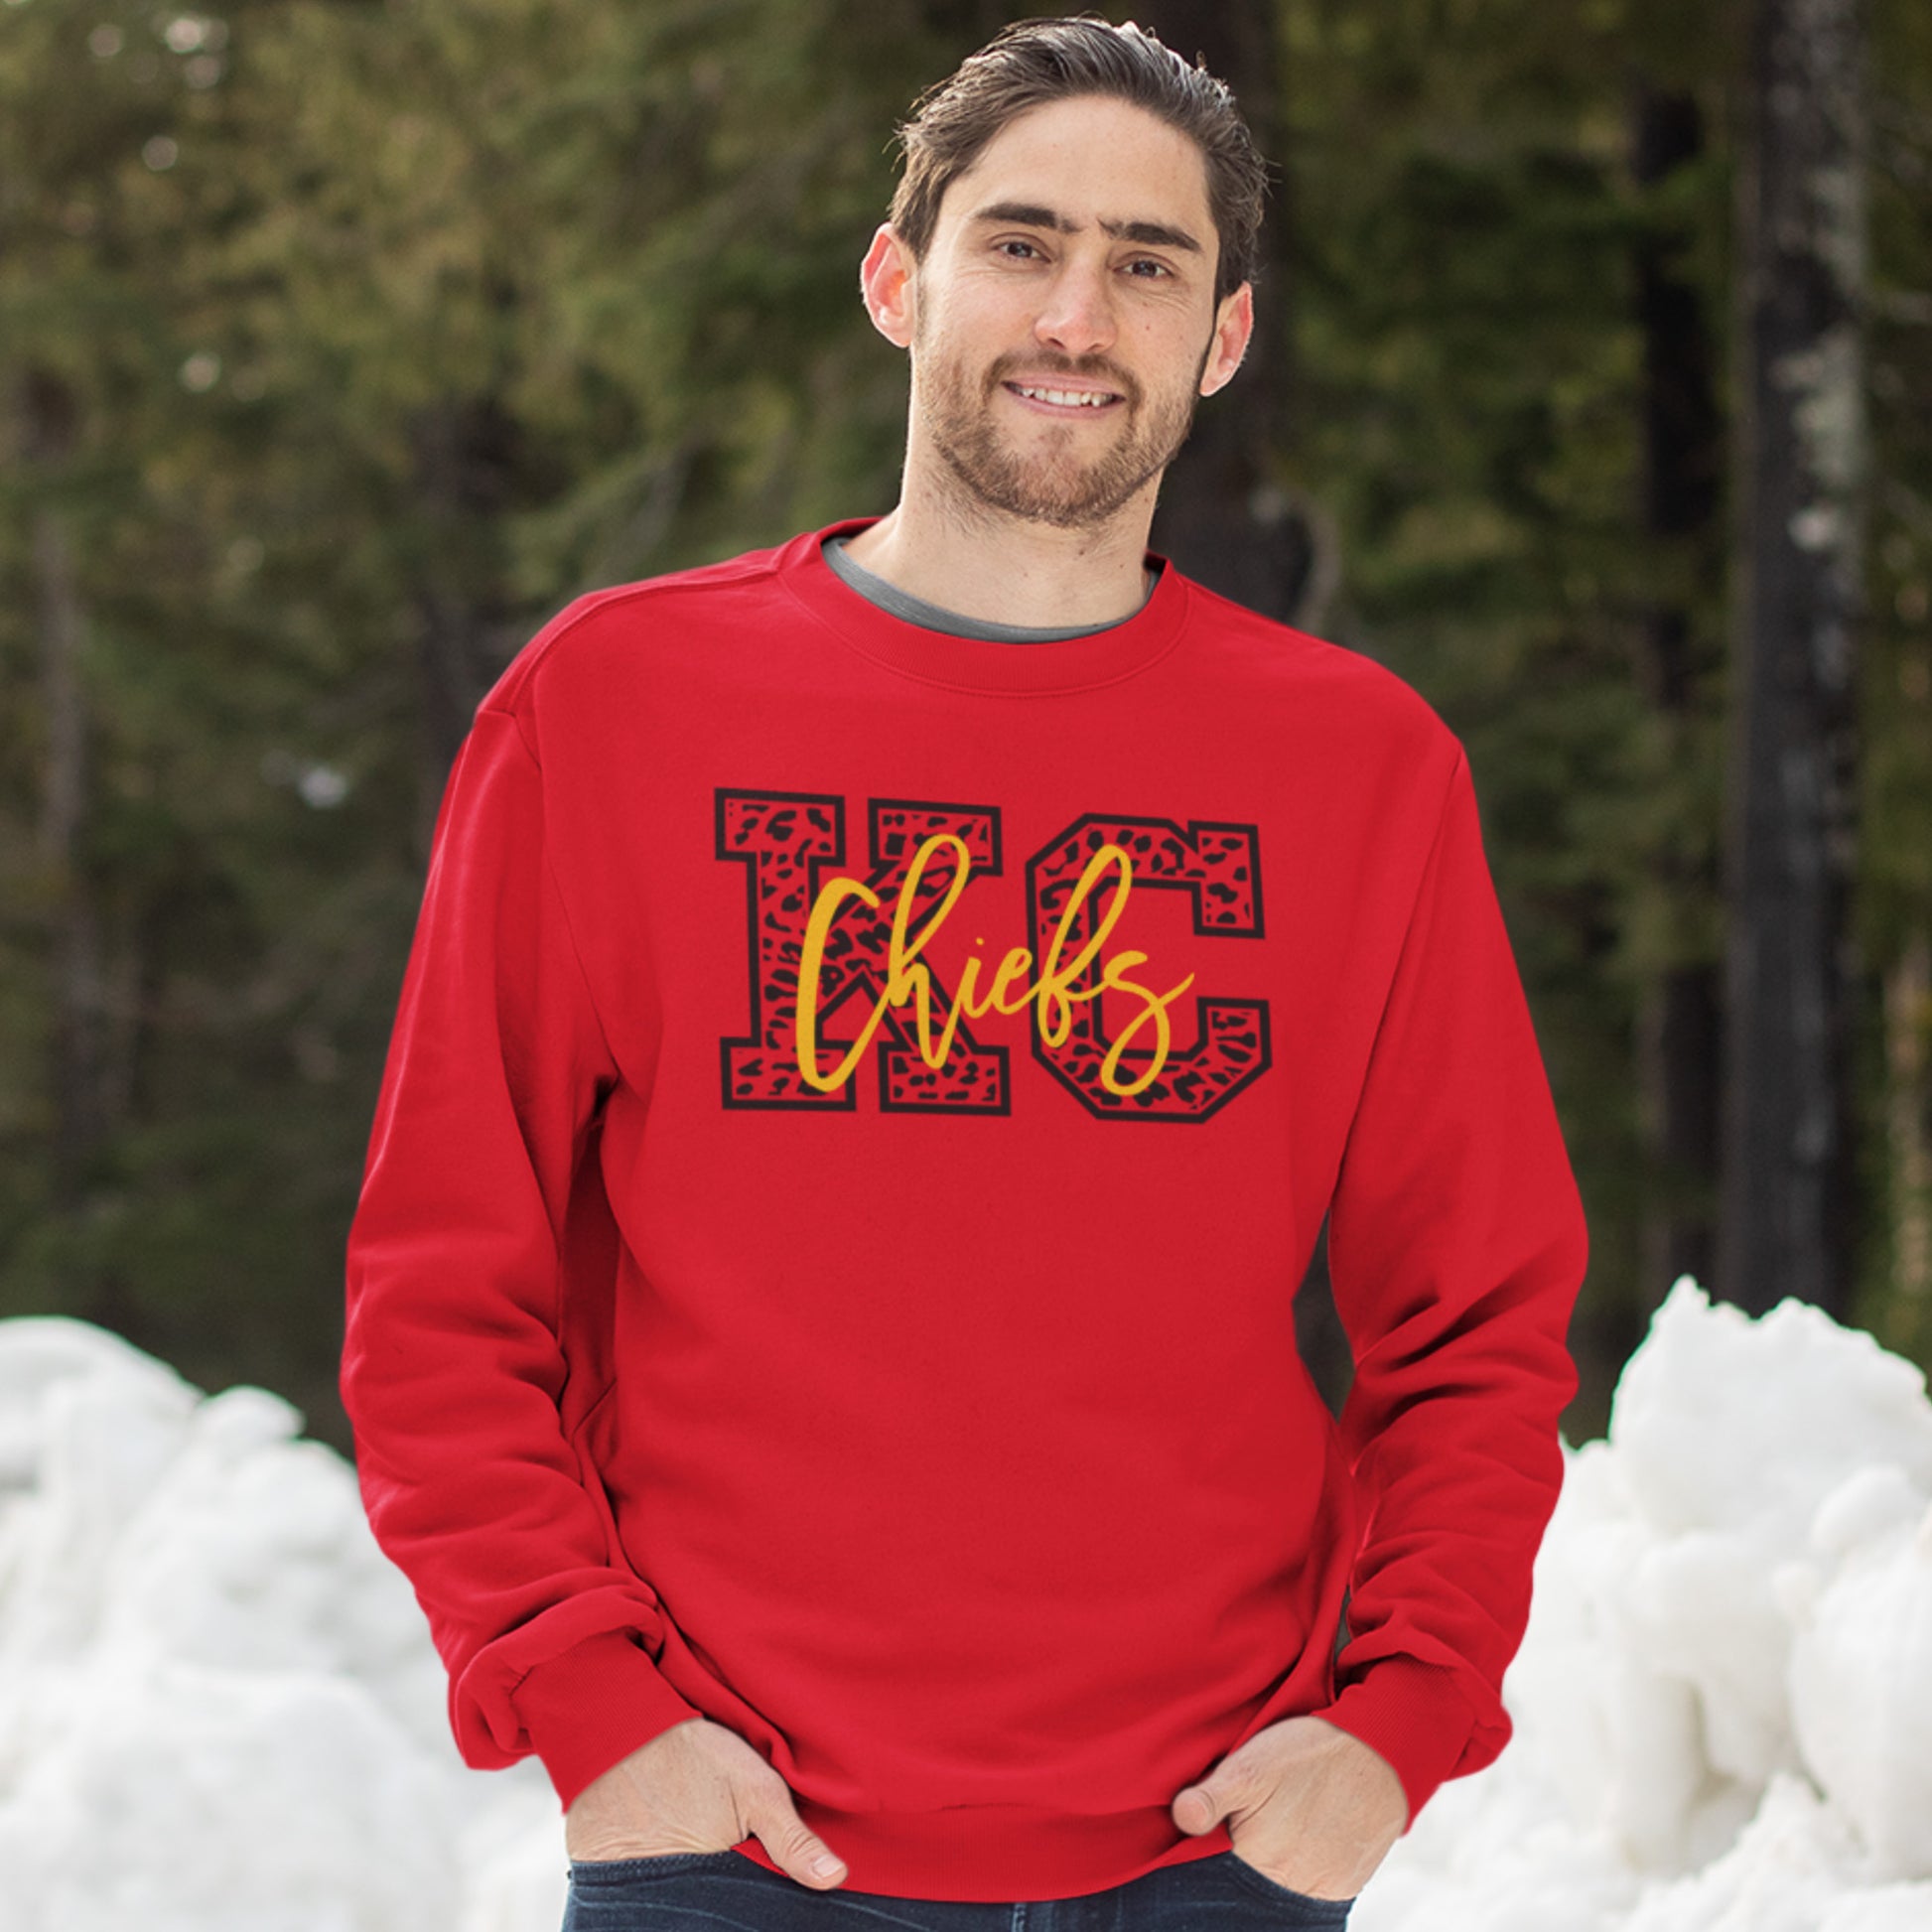 KC Swag Kansas City Chiefs Black & Gold Cheetah KC on a Red Crewneck Sweatshirt worn by a male model with is hands in his pockets standing in a snow covered forrest